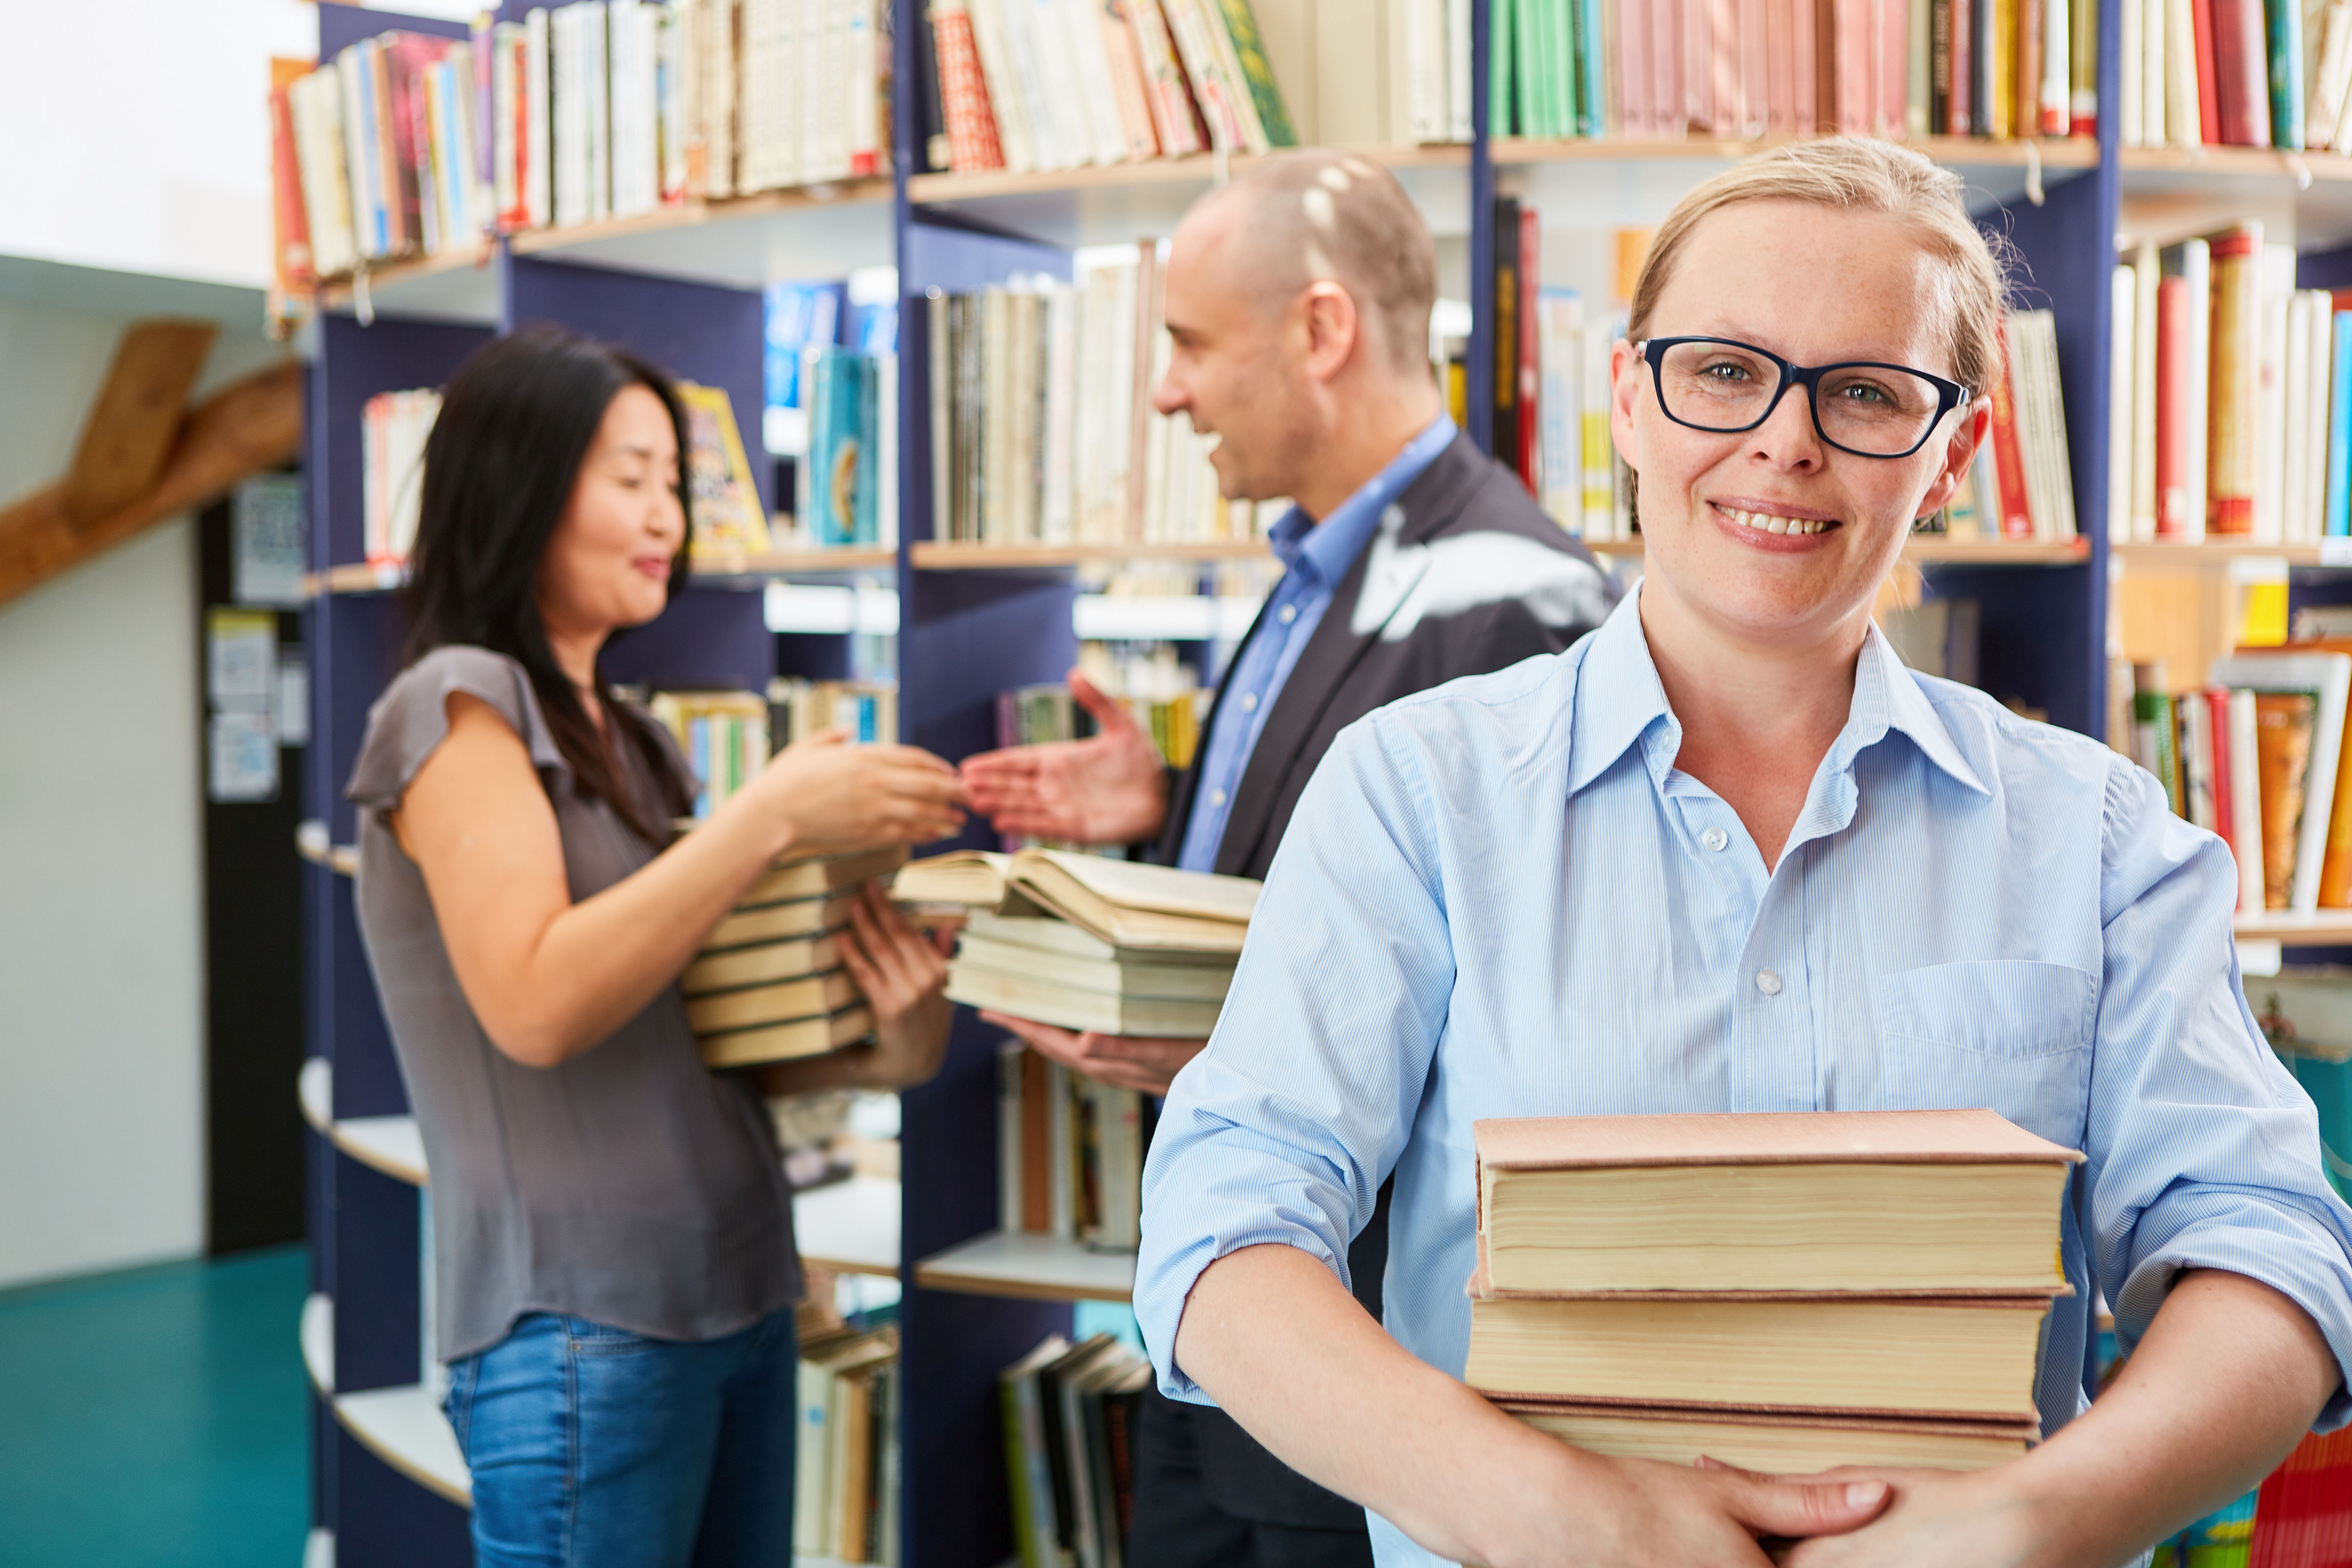 Person standing in foreground smiling with a stack of books in hand. Two people in background also holding books and shaking hands.